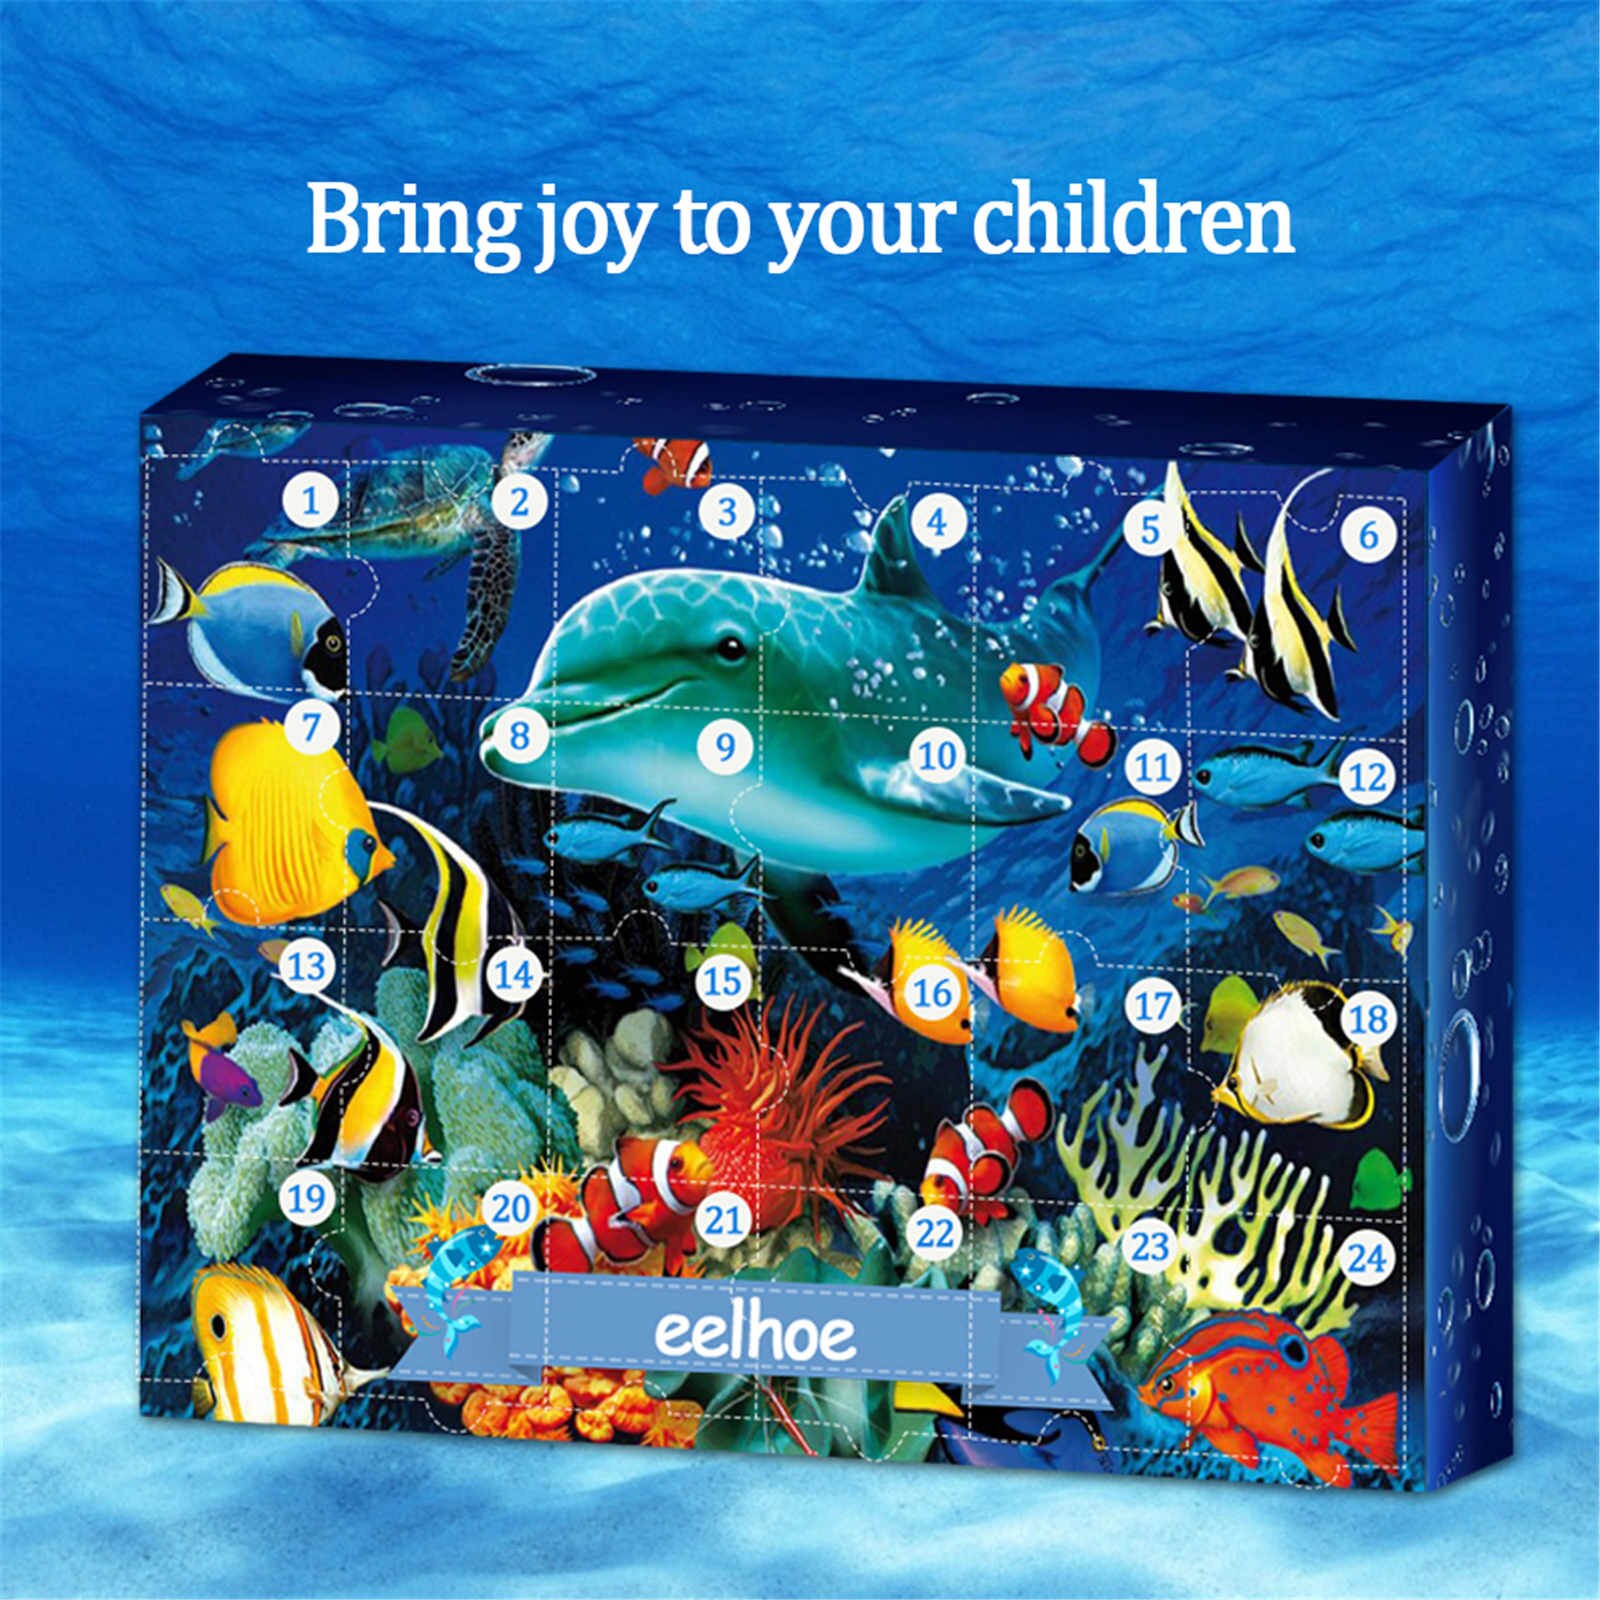 Christmas Underwater World Advent Calendar-exquisite Mysterious Christmas Countdown Calendar With 24 Small